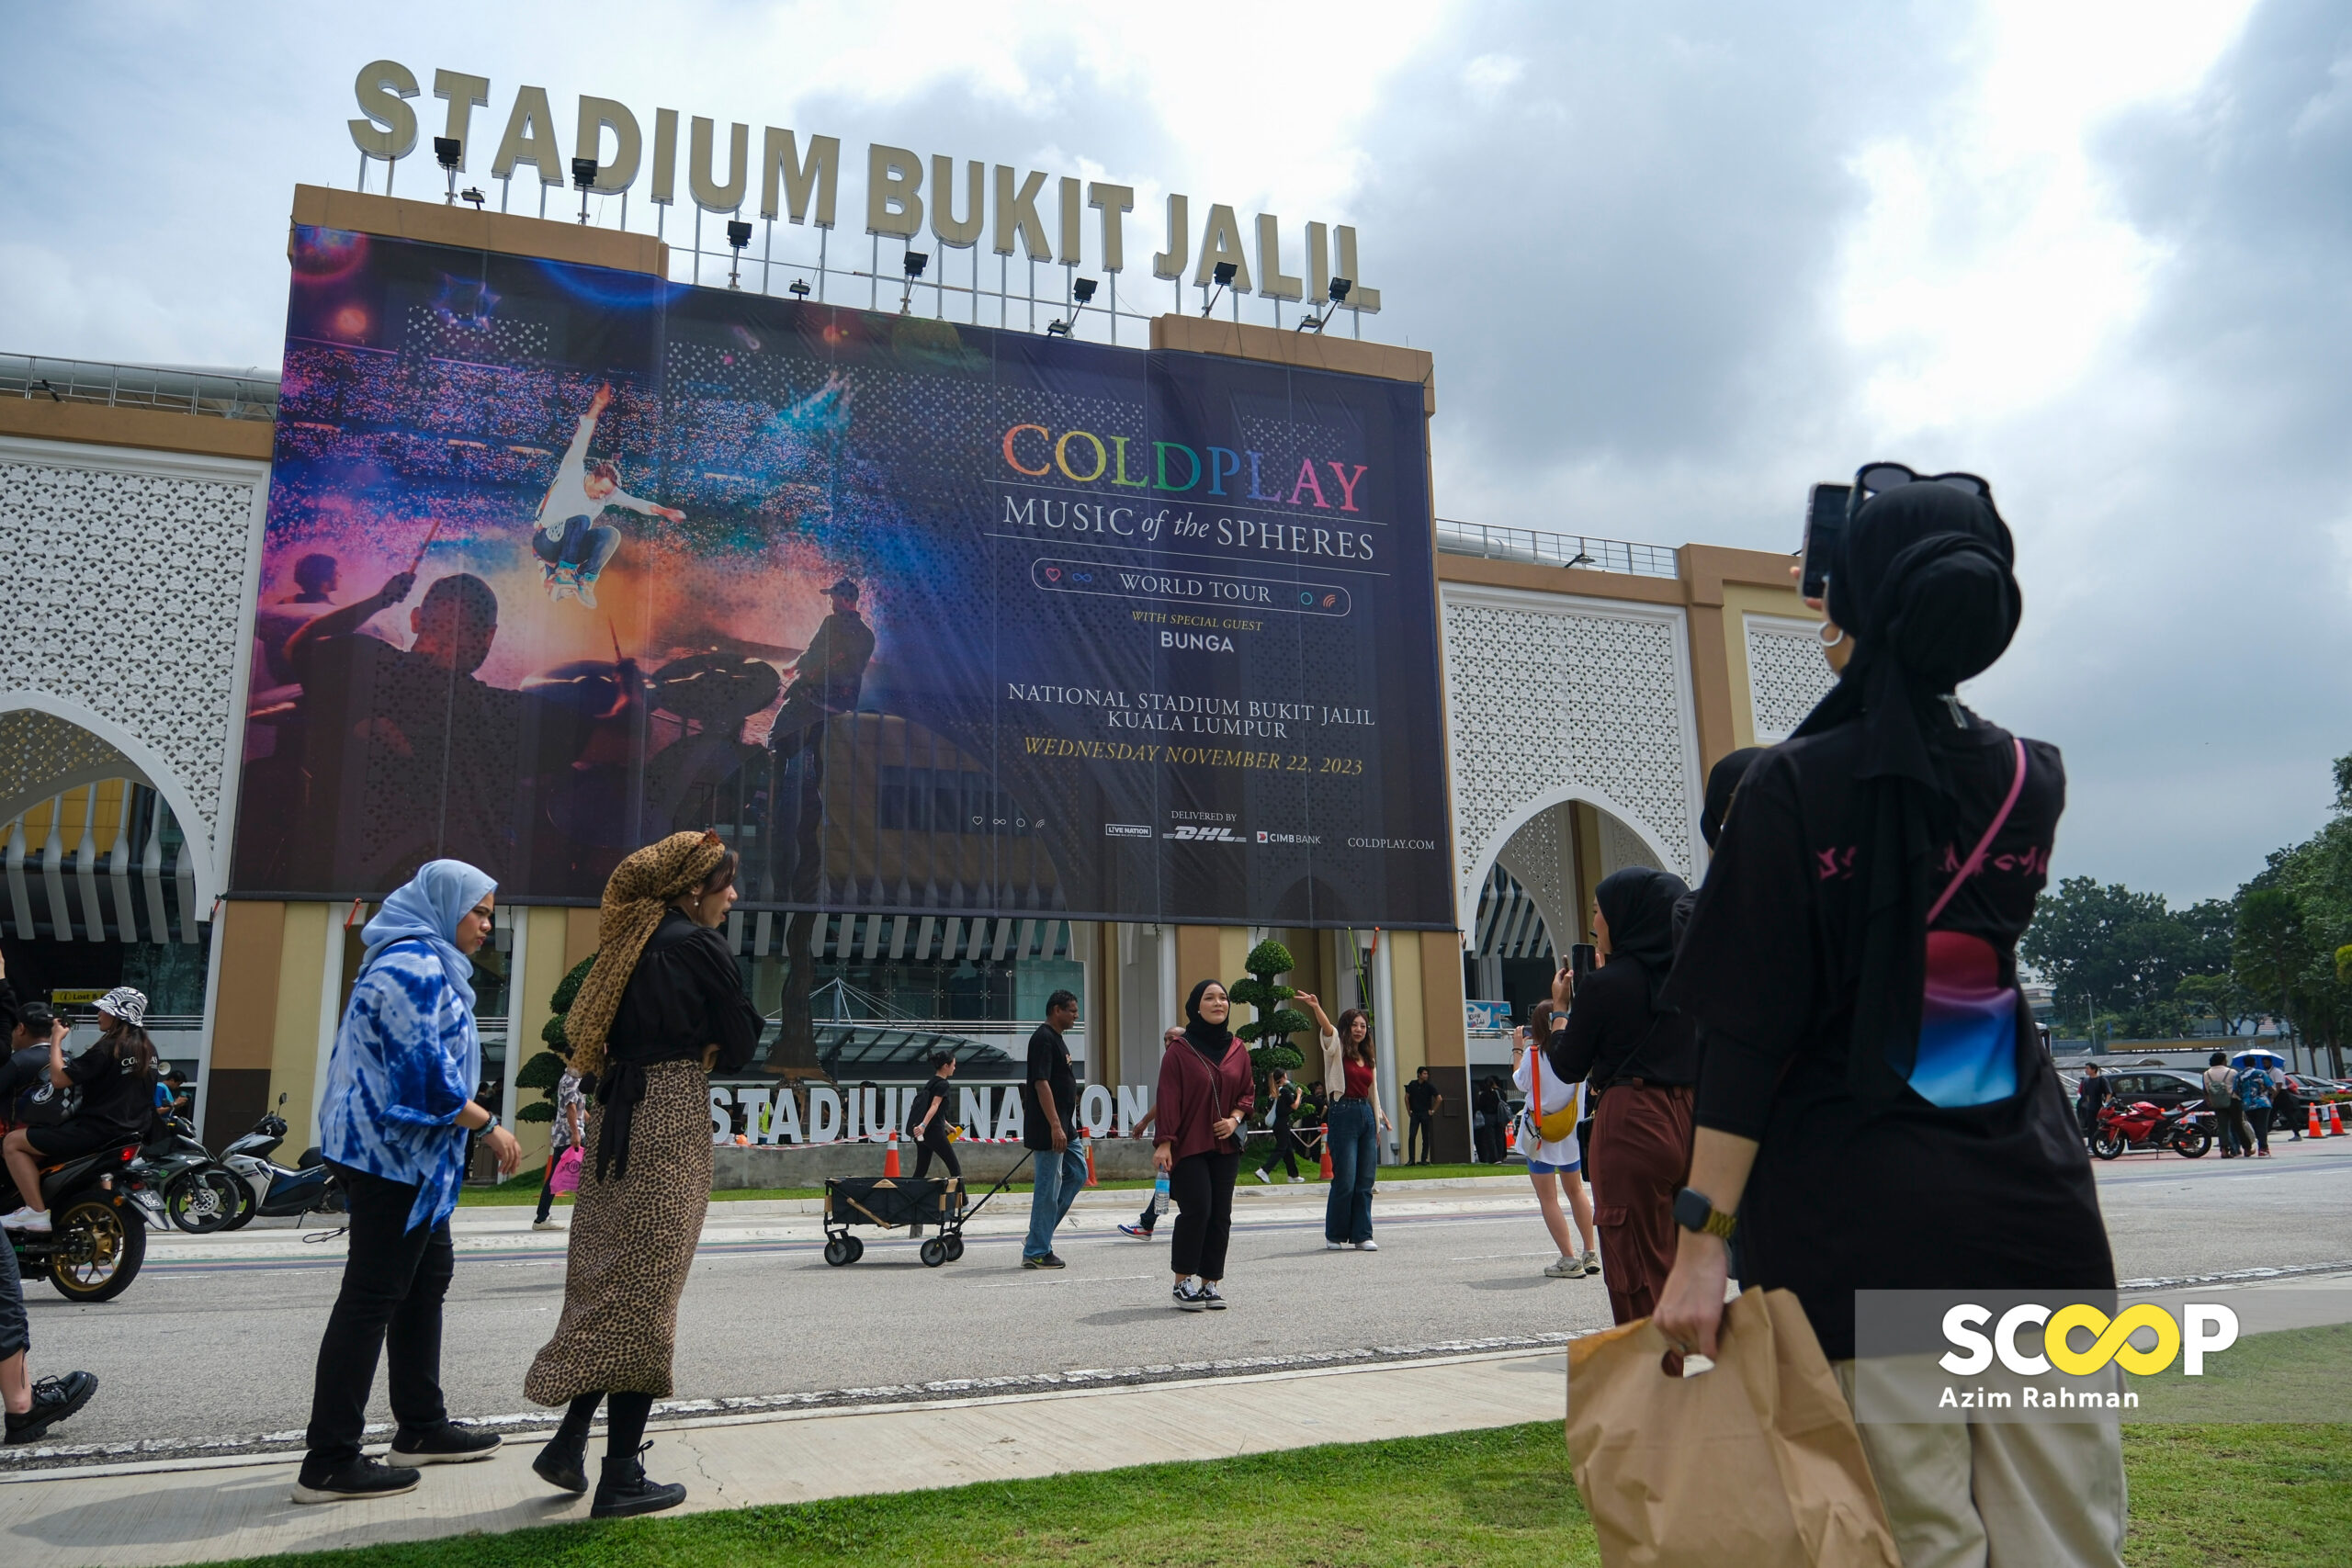 Coldplay in KL: high Xyloband return rate shows M’sia only behind Denmark, Japan in civic-mindedness – Julie Jalaluddin